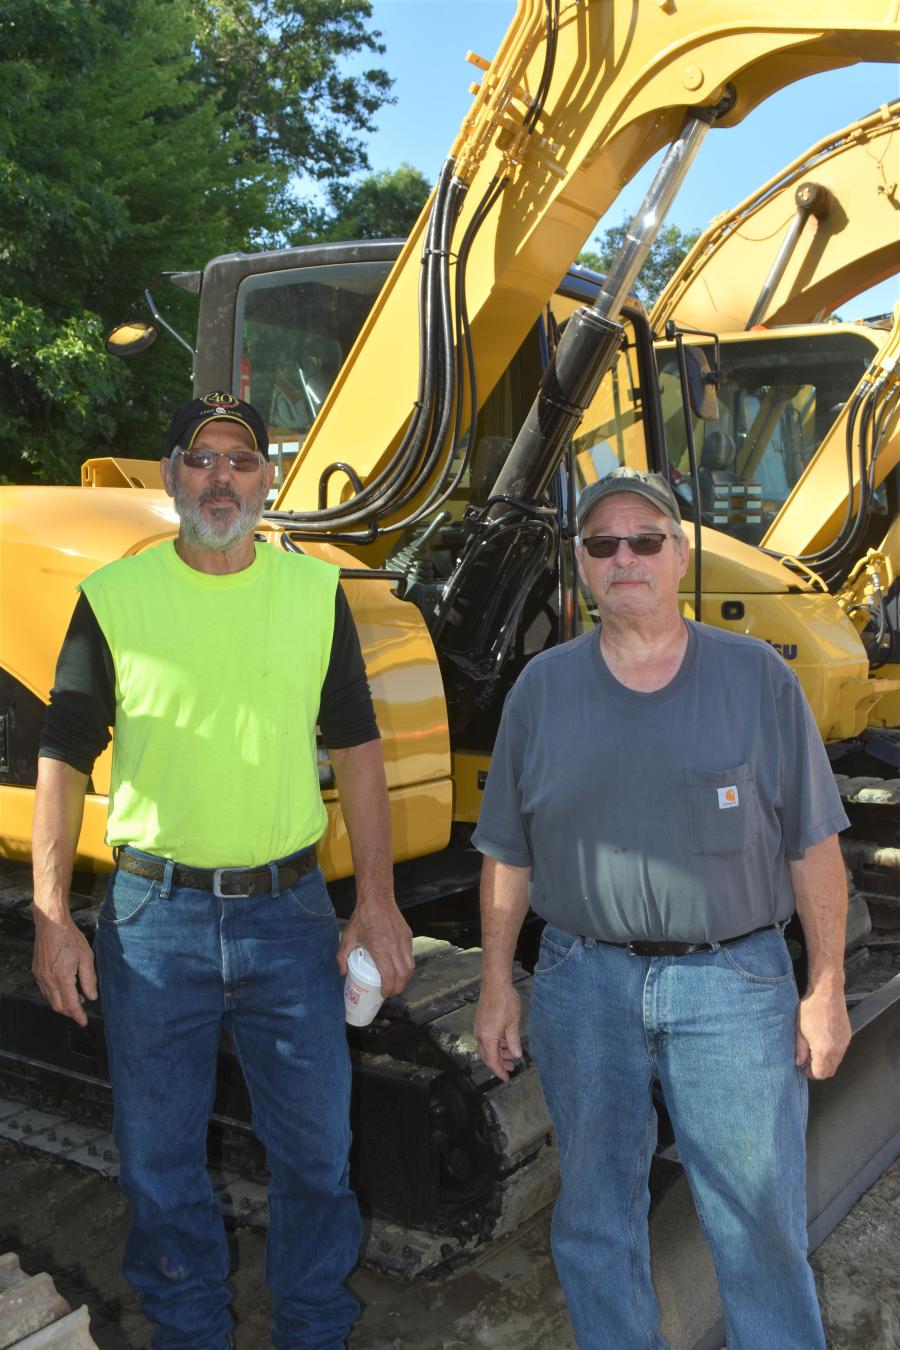 Douglas Deptula (L) and Ron Ethridge of Columbia, Conn., check out the great lineup of used excavators.
(CEG photo)